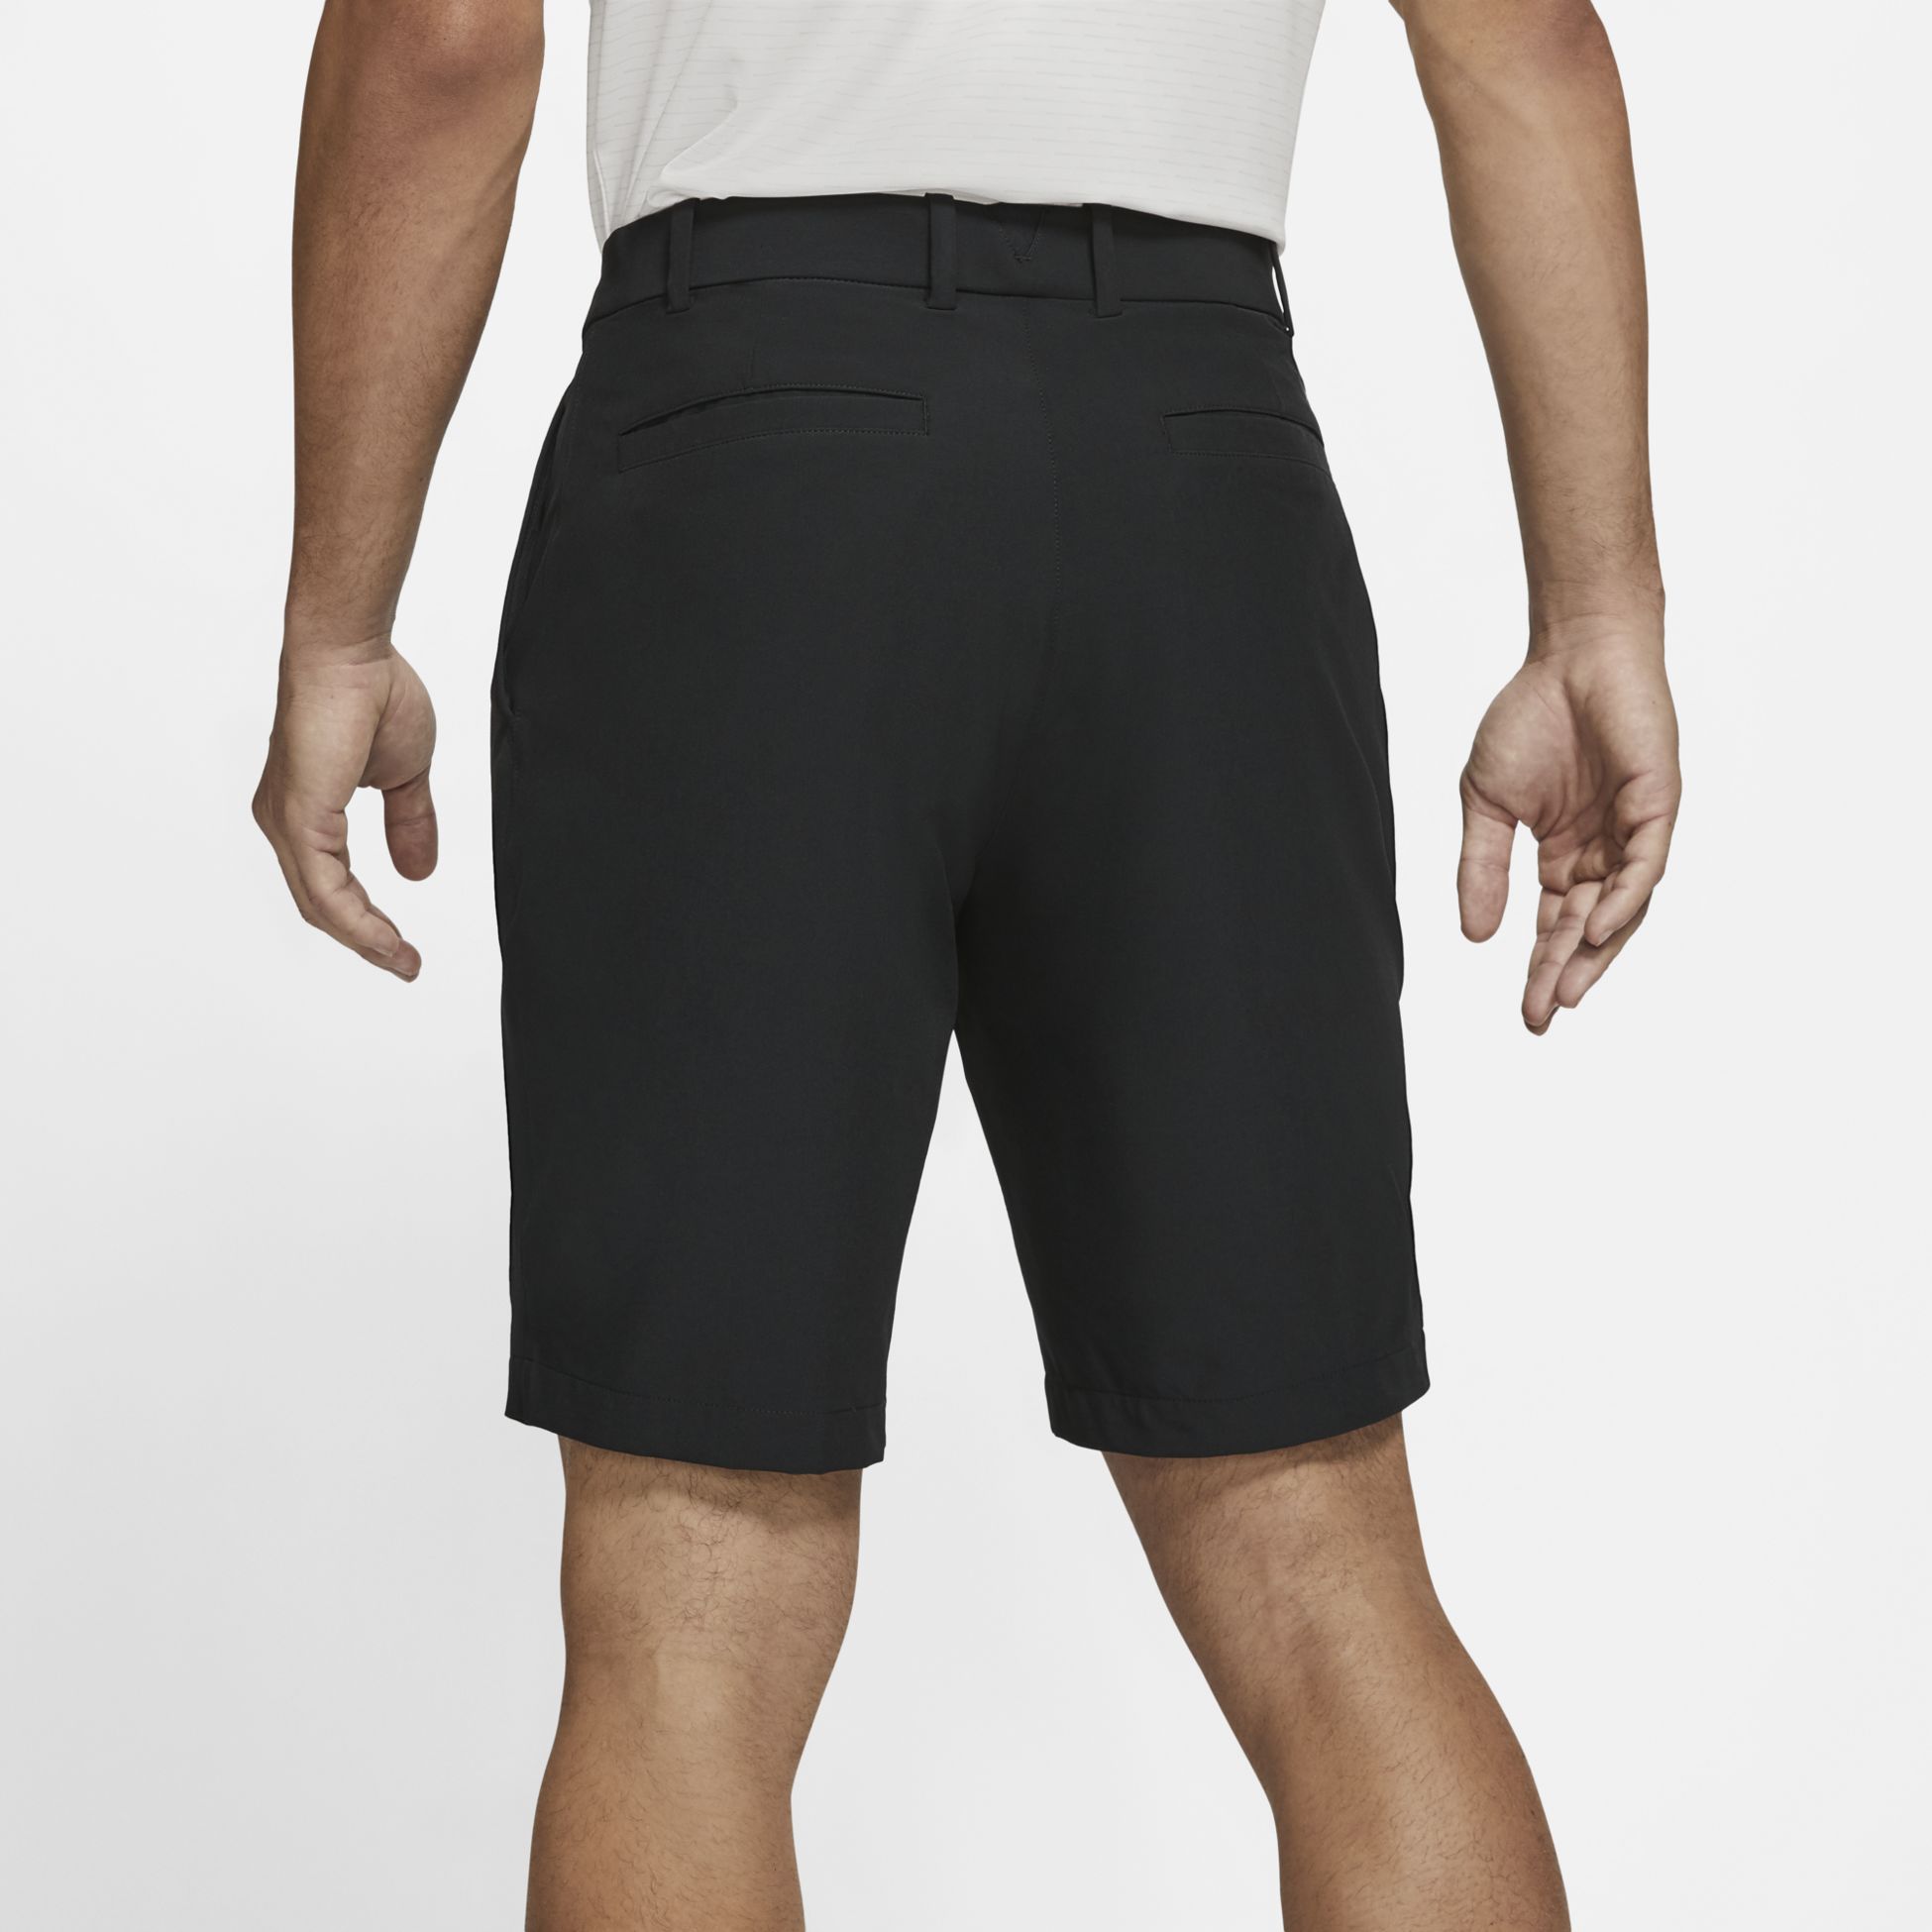 NIKE, M NK DRI-FIT VICTORY 10.5 IN SHORTS